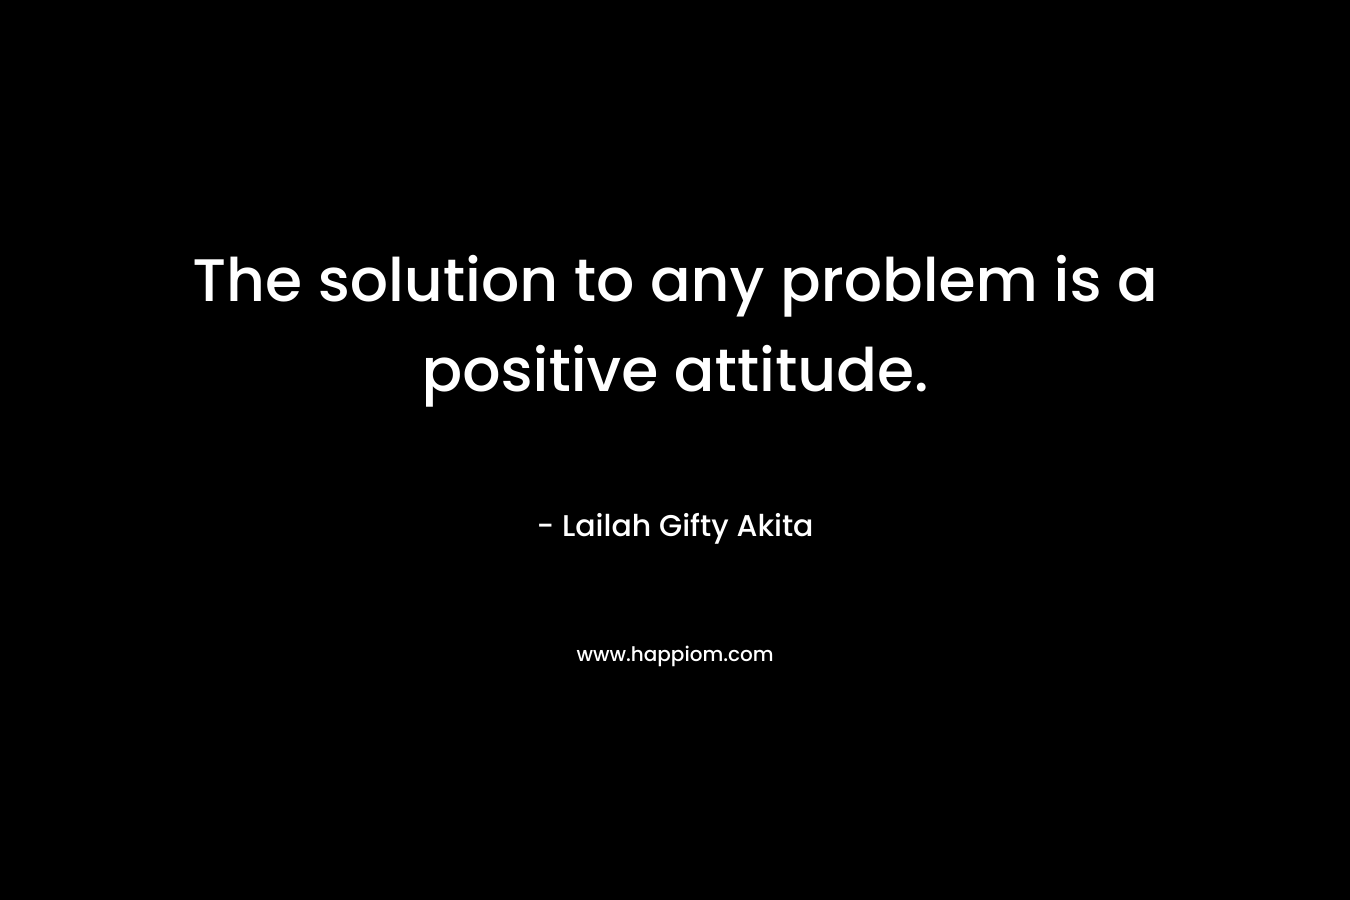 The solution to any problem is a positive attitude.